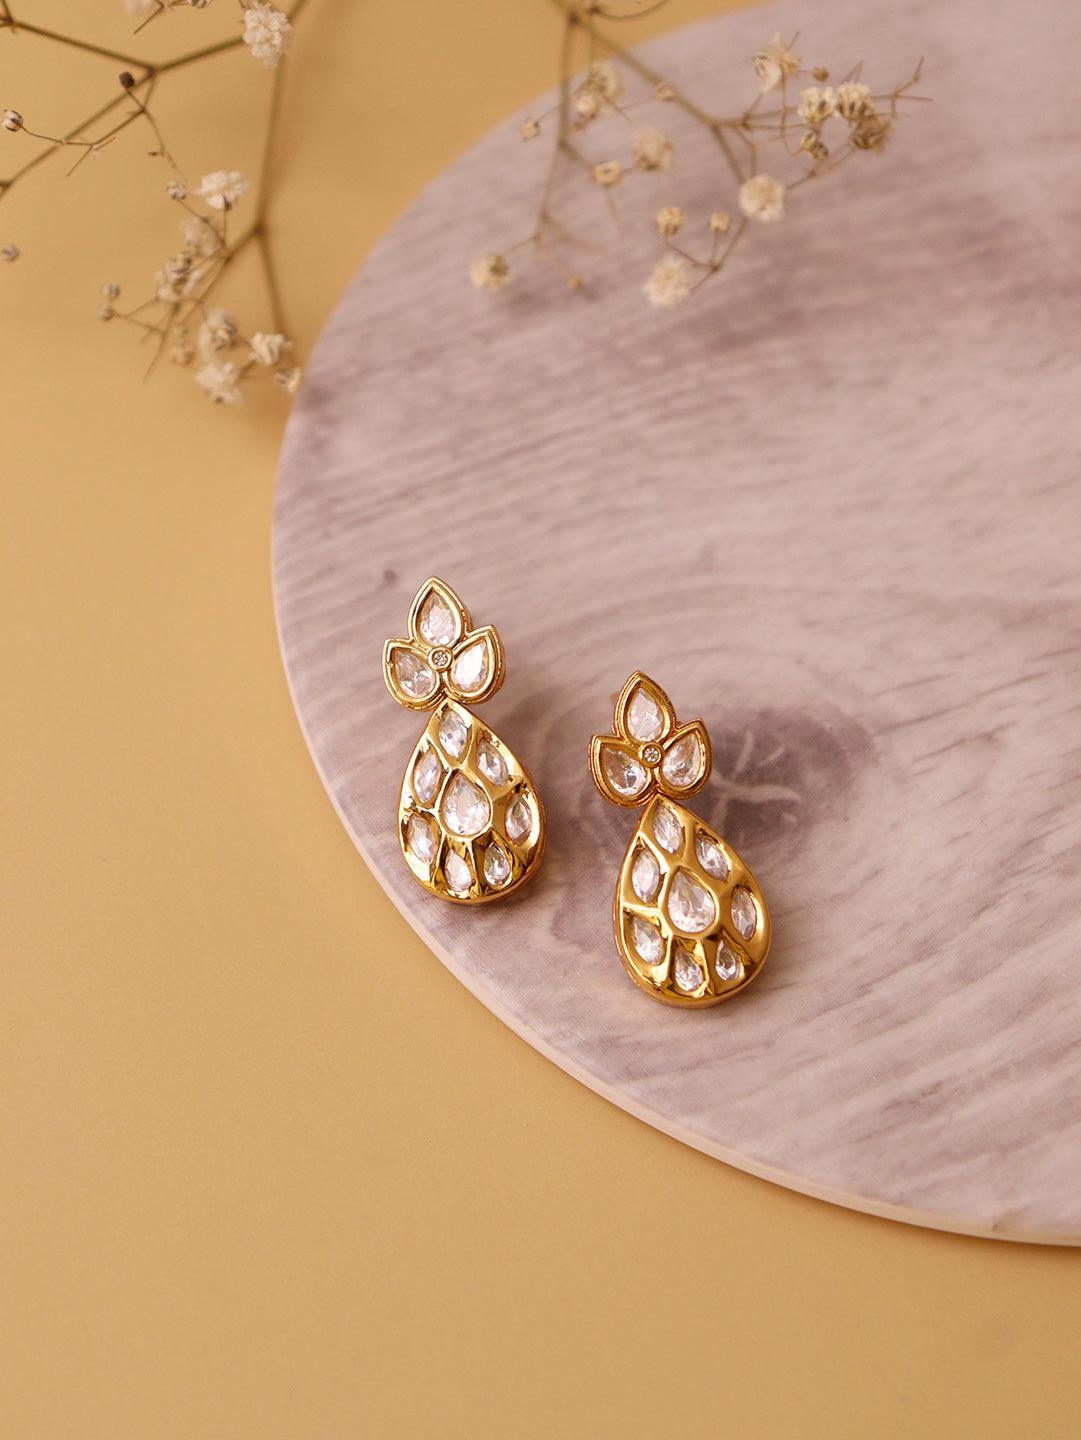 Small Simple Pearl Wedding Studs  Gold Lace Floral Bridal Earrings   VintageInspired  Edera Jewelry  Heirloom Lace Wedding Accessories